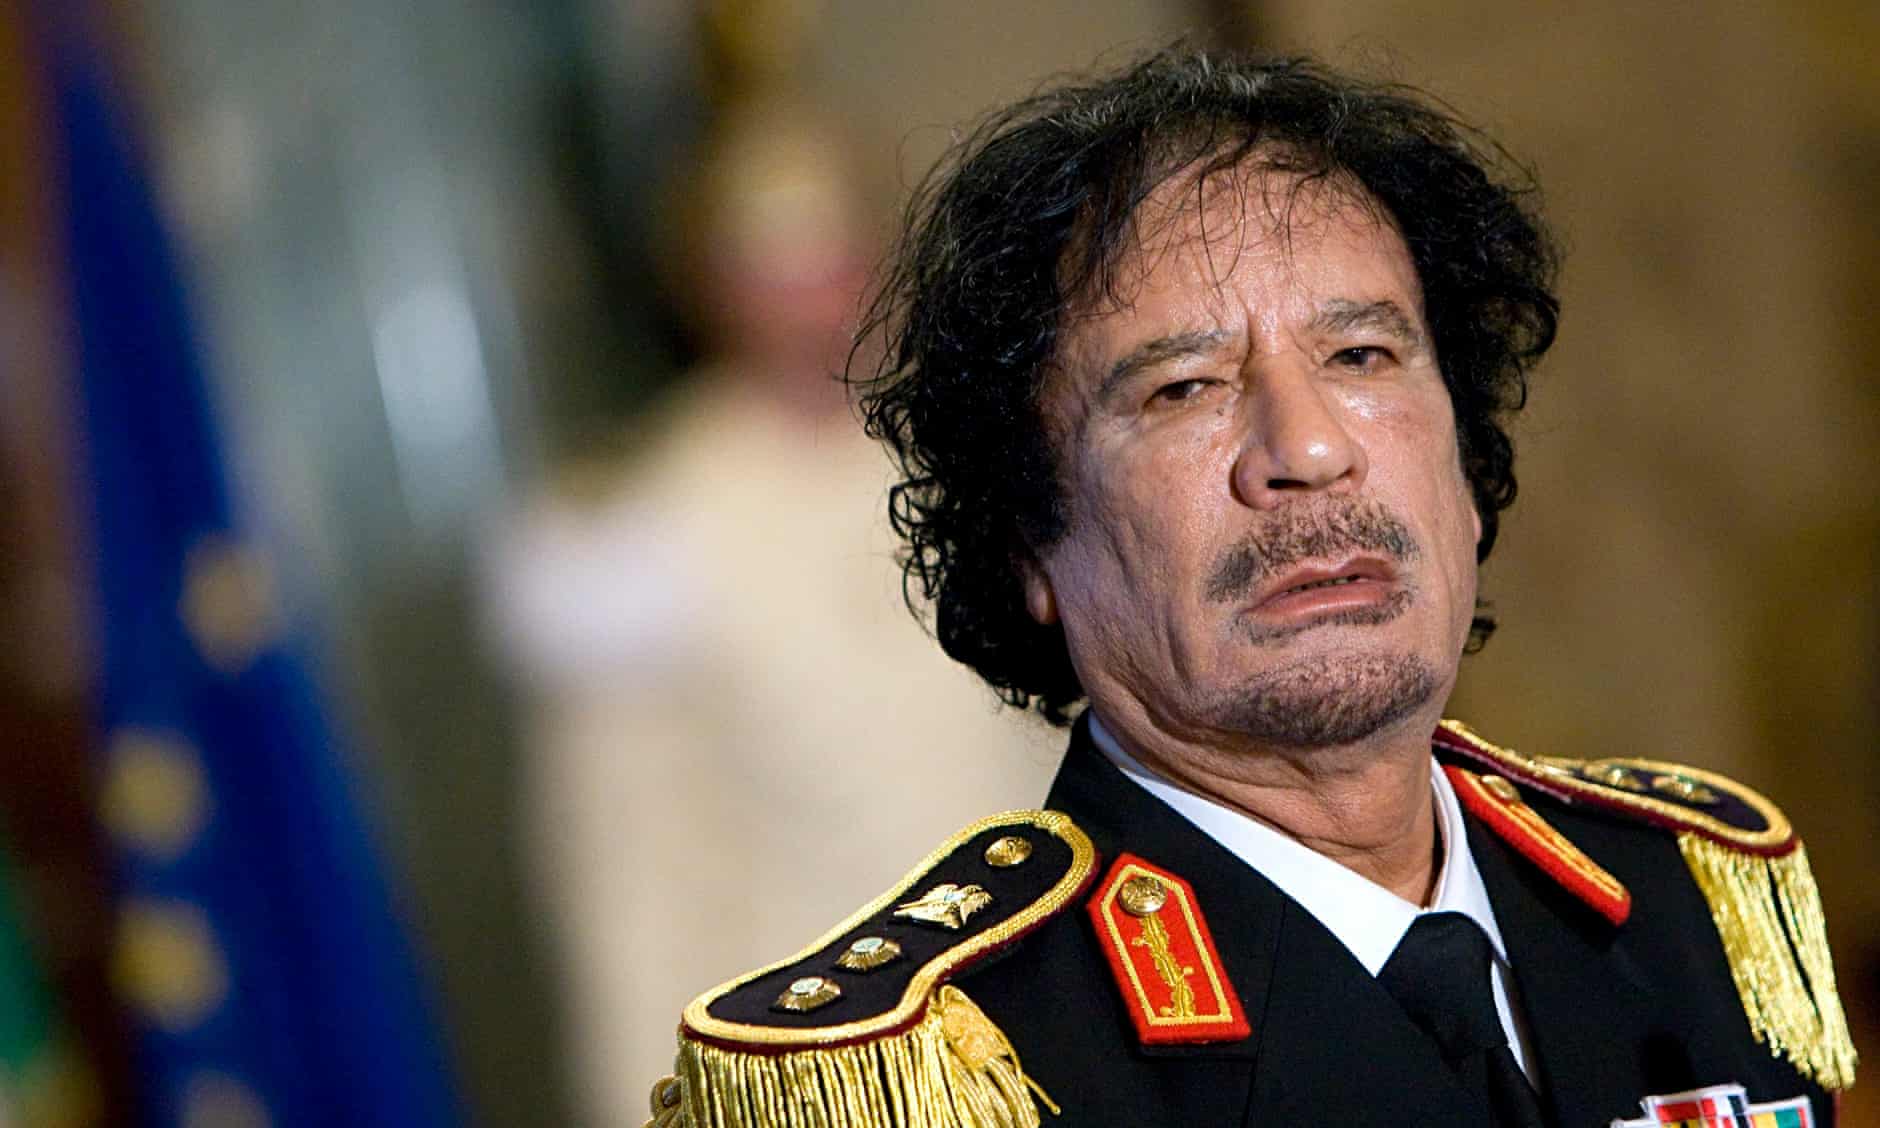 government, conservative, muammar gaddafi, tories awarded £1.2m contract to canadian firm which bribed muammar gaddafi’s son